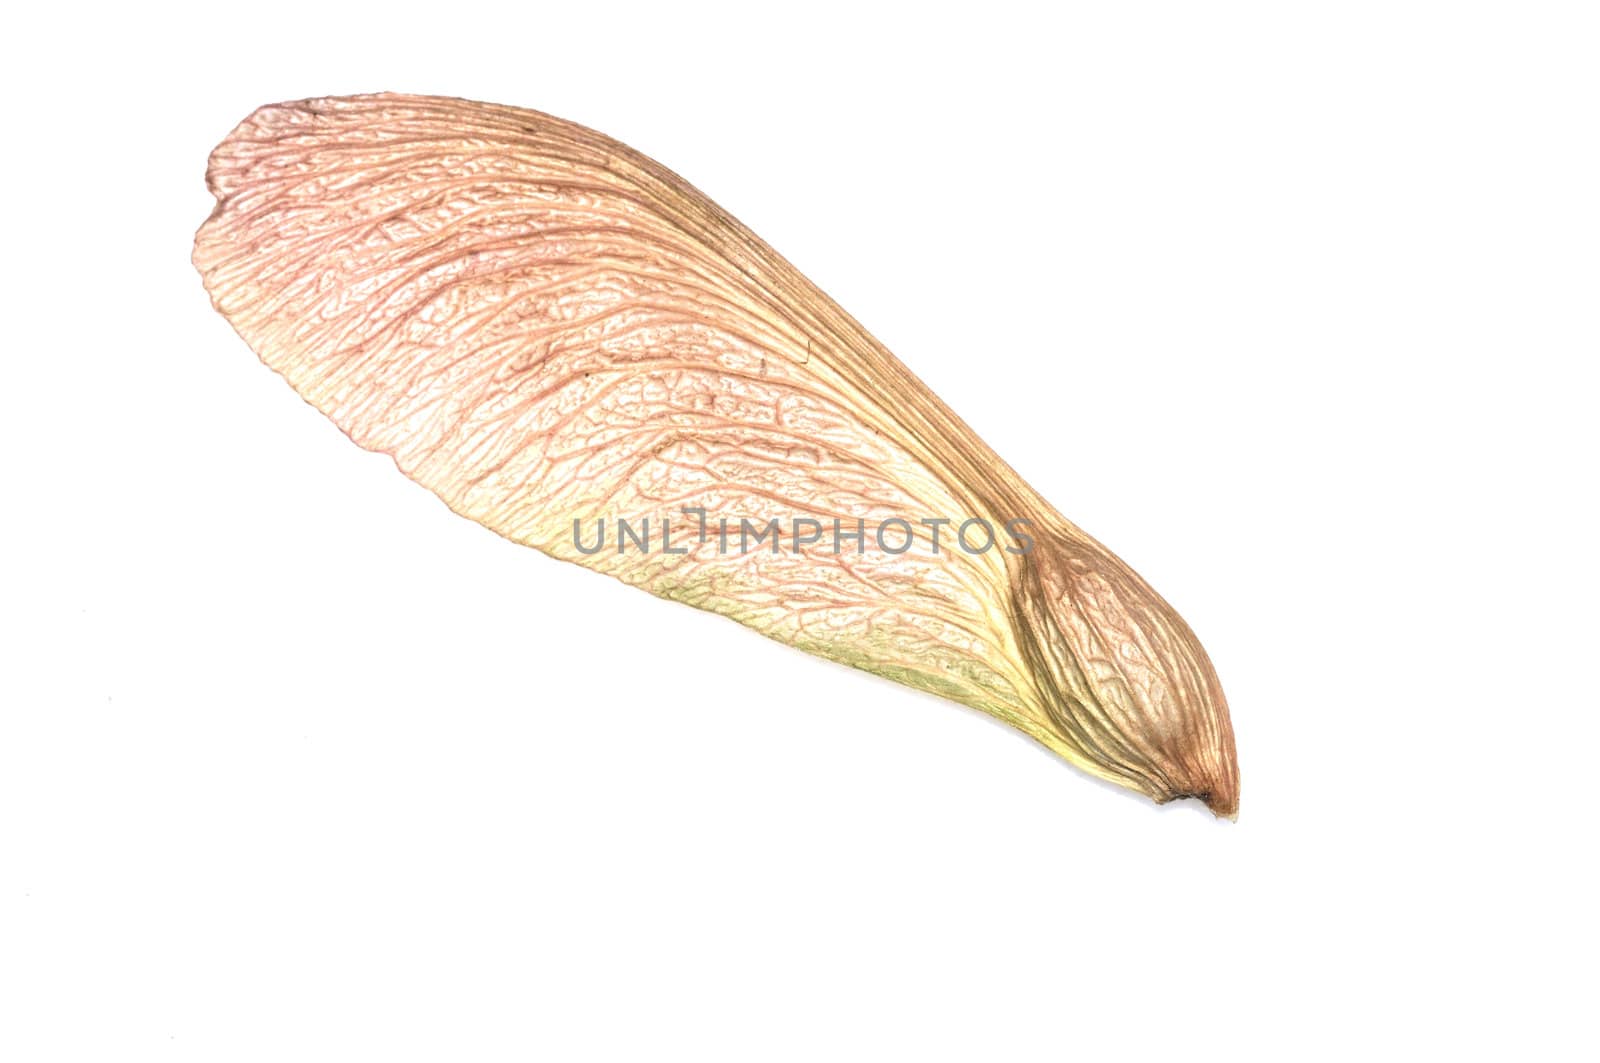 A single maple seed on a white background.